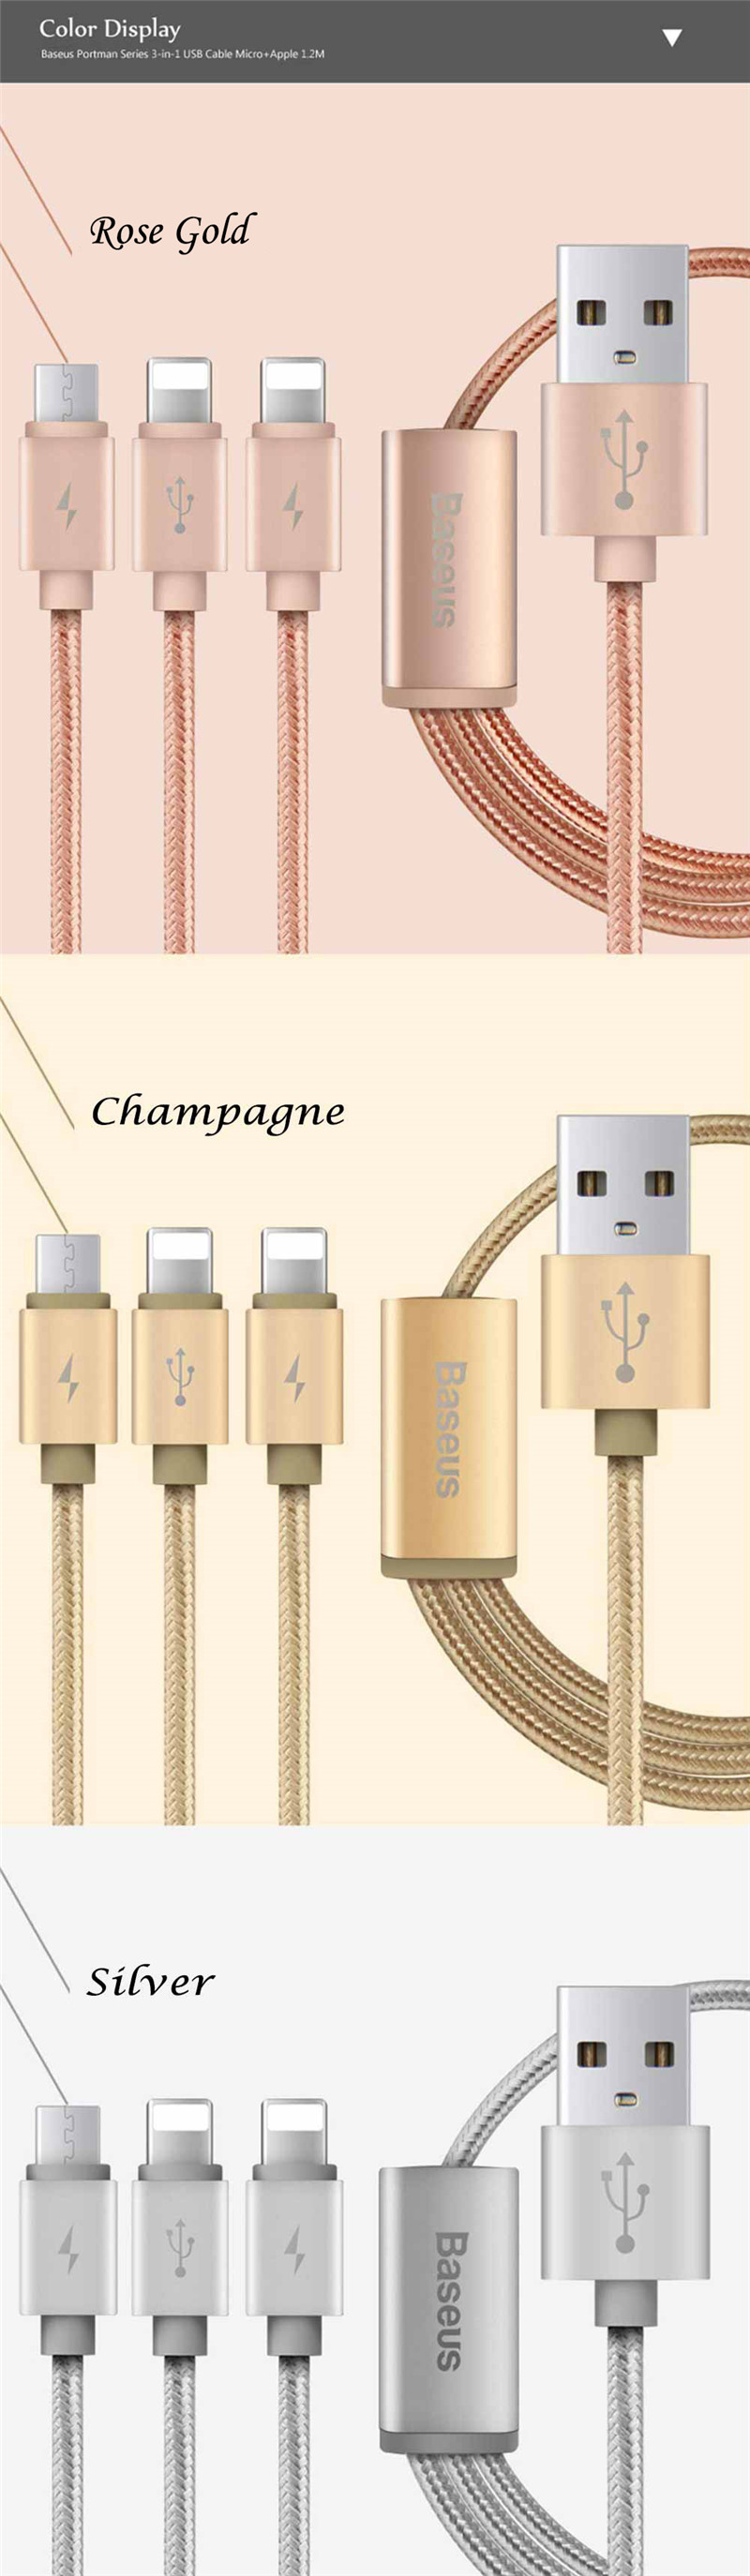 BASEUS 3 in1 Dual 8 Pin Micro USB Charging Sync Data Cable